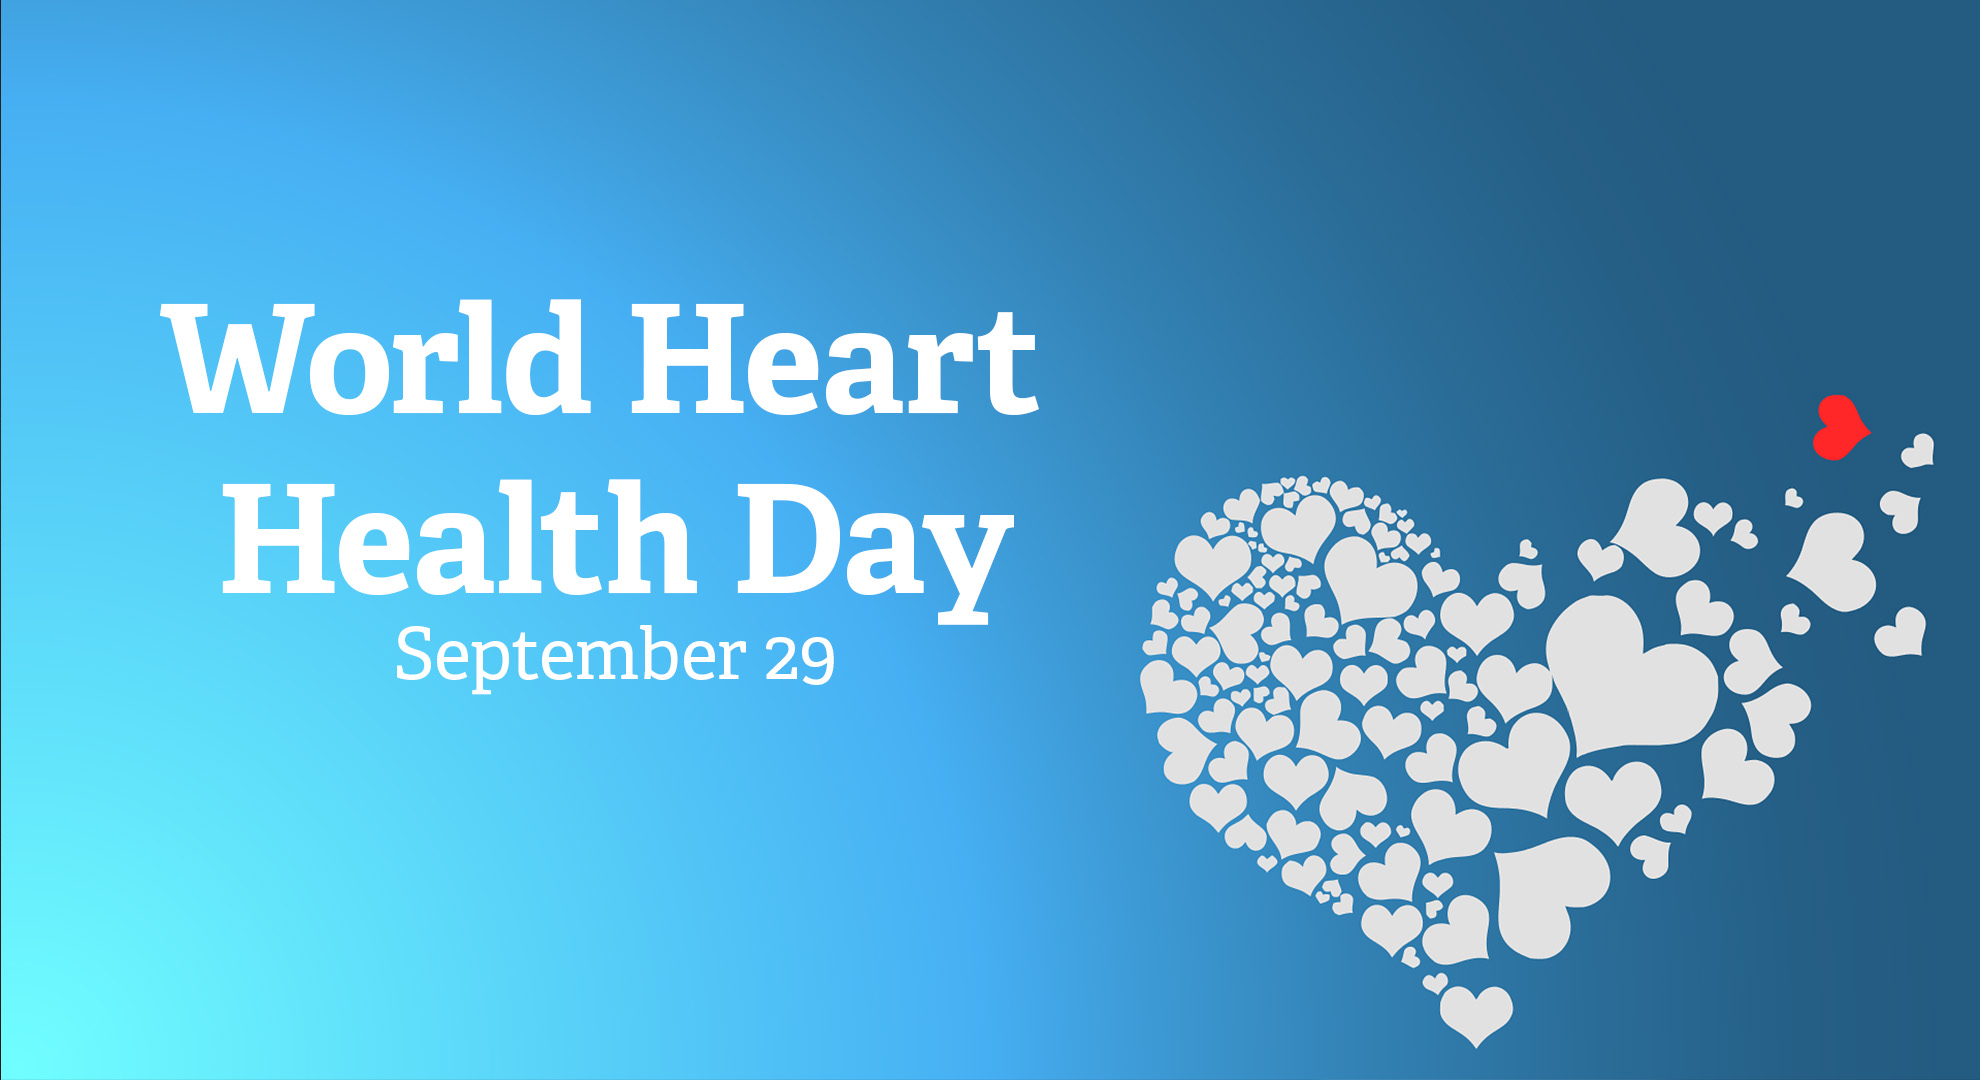 A blue gradient background. The bottom right is a heart made our of smaller white hearts and one red heart. With serif font on the left reads World Hear Health Day September 29